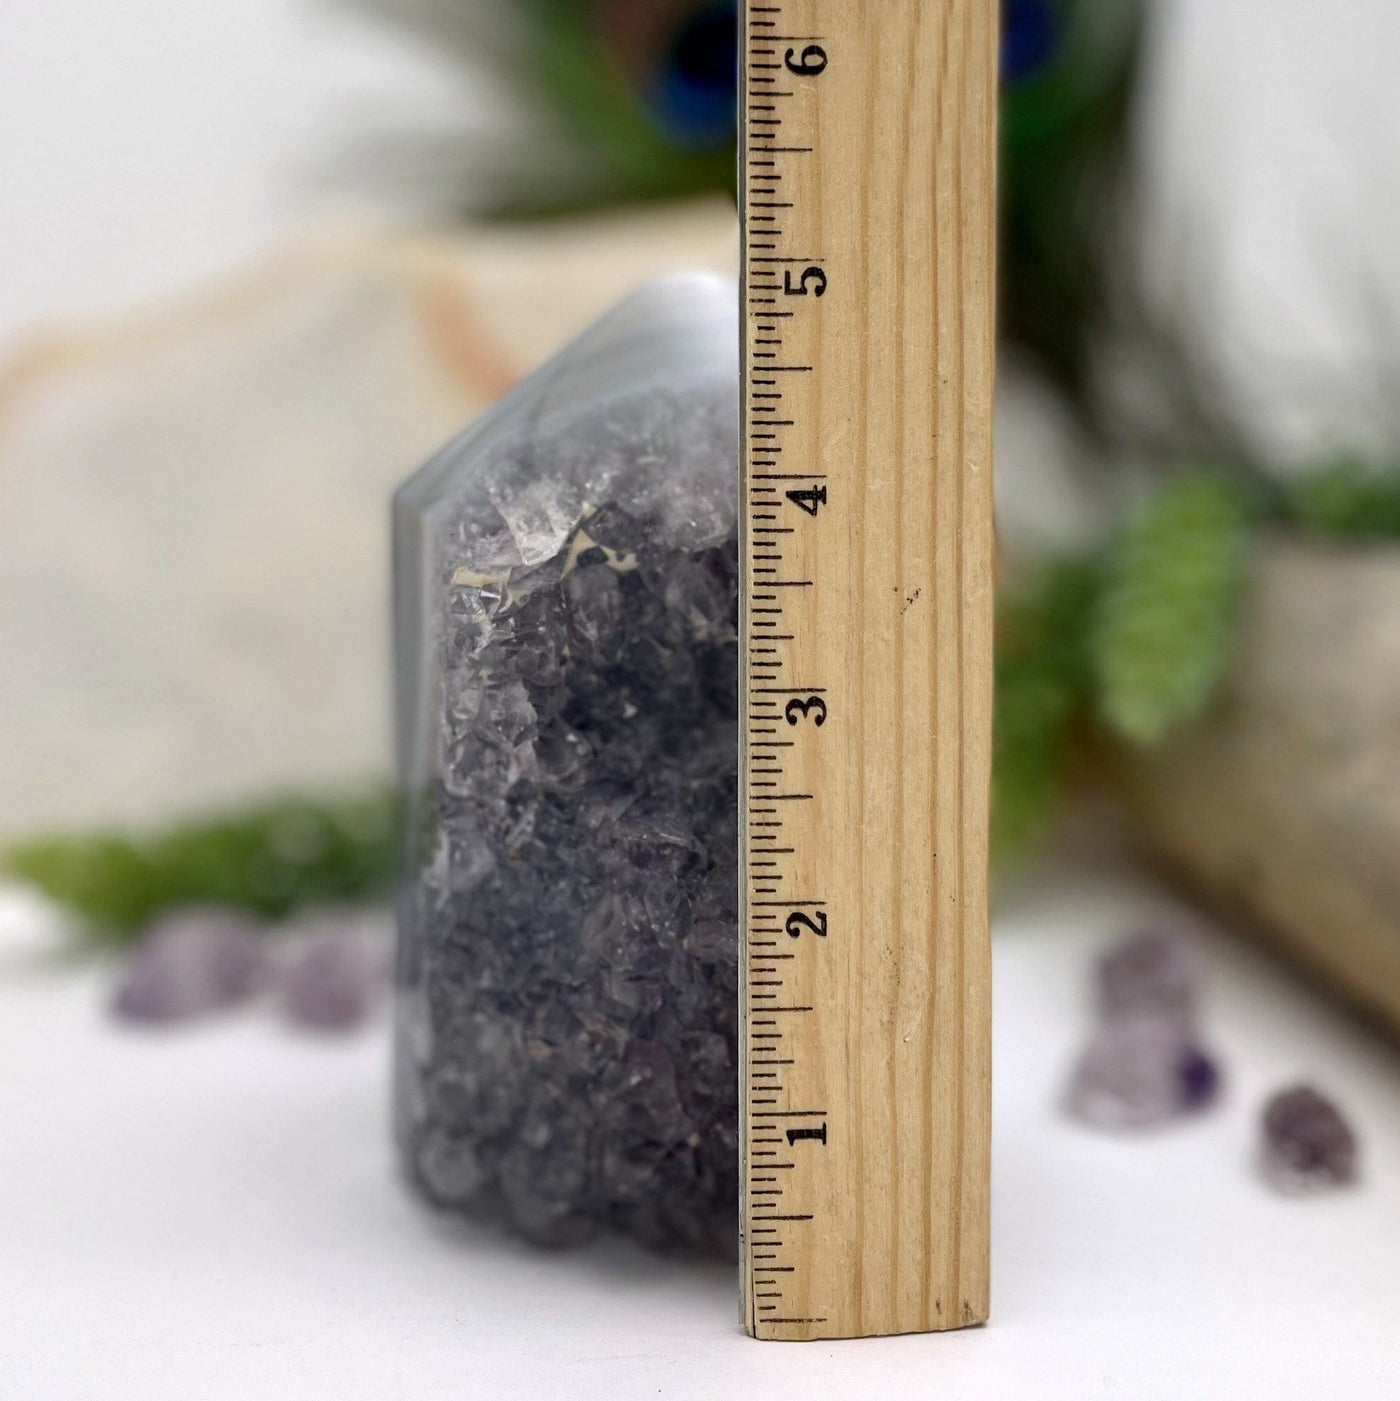 Amethyst Polished Point next to ruler for size reference